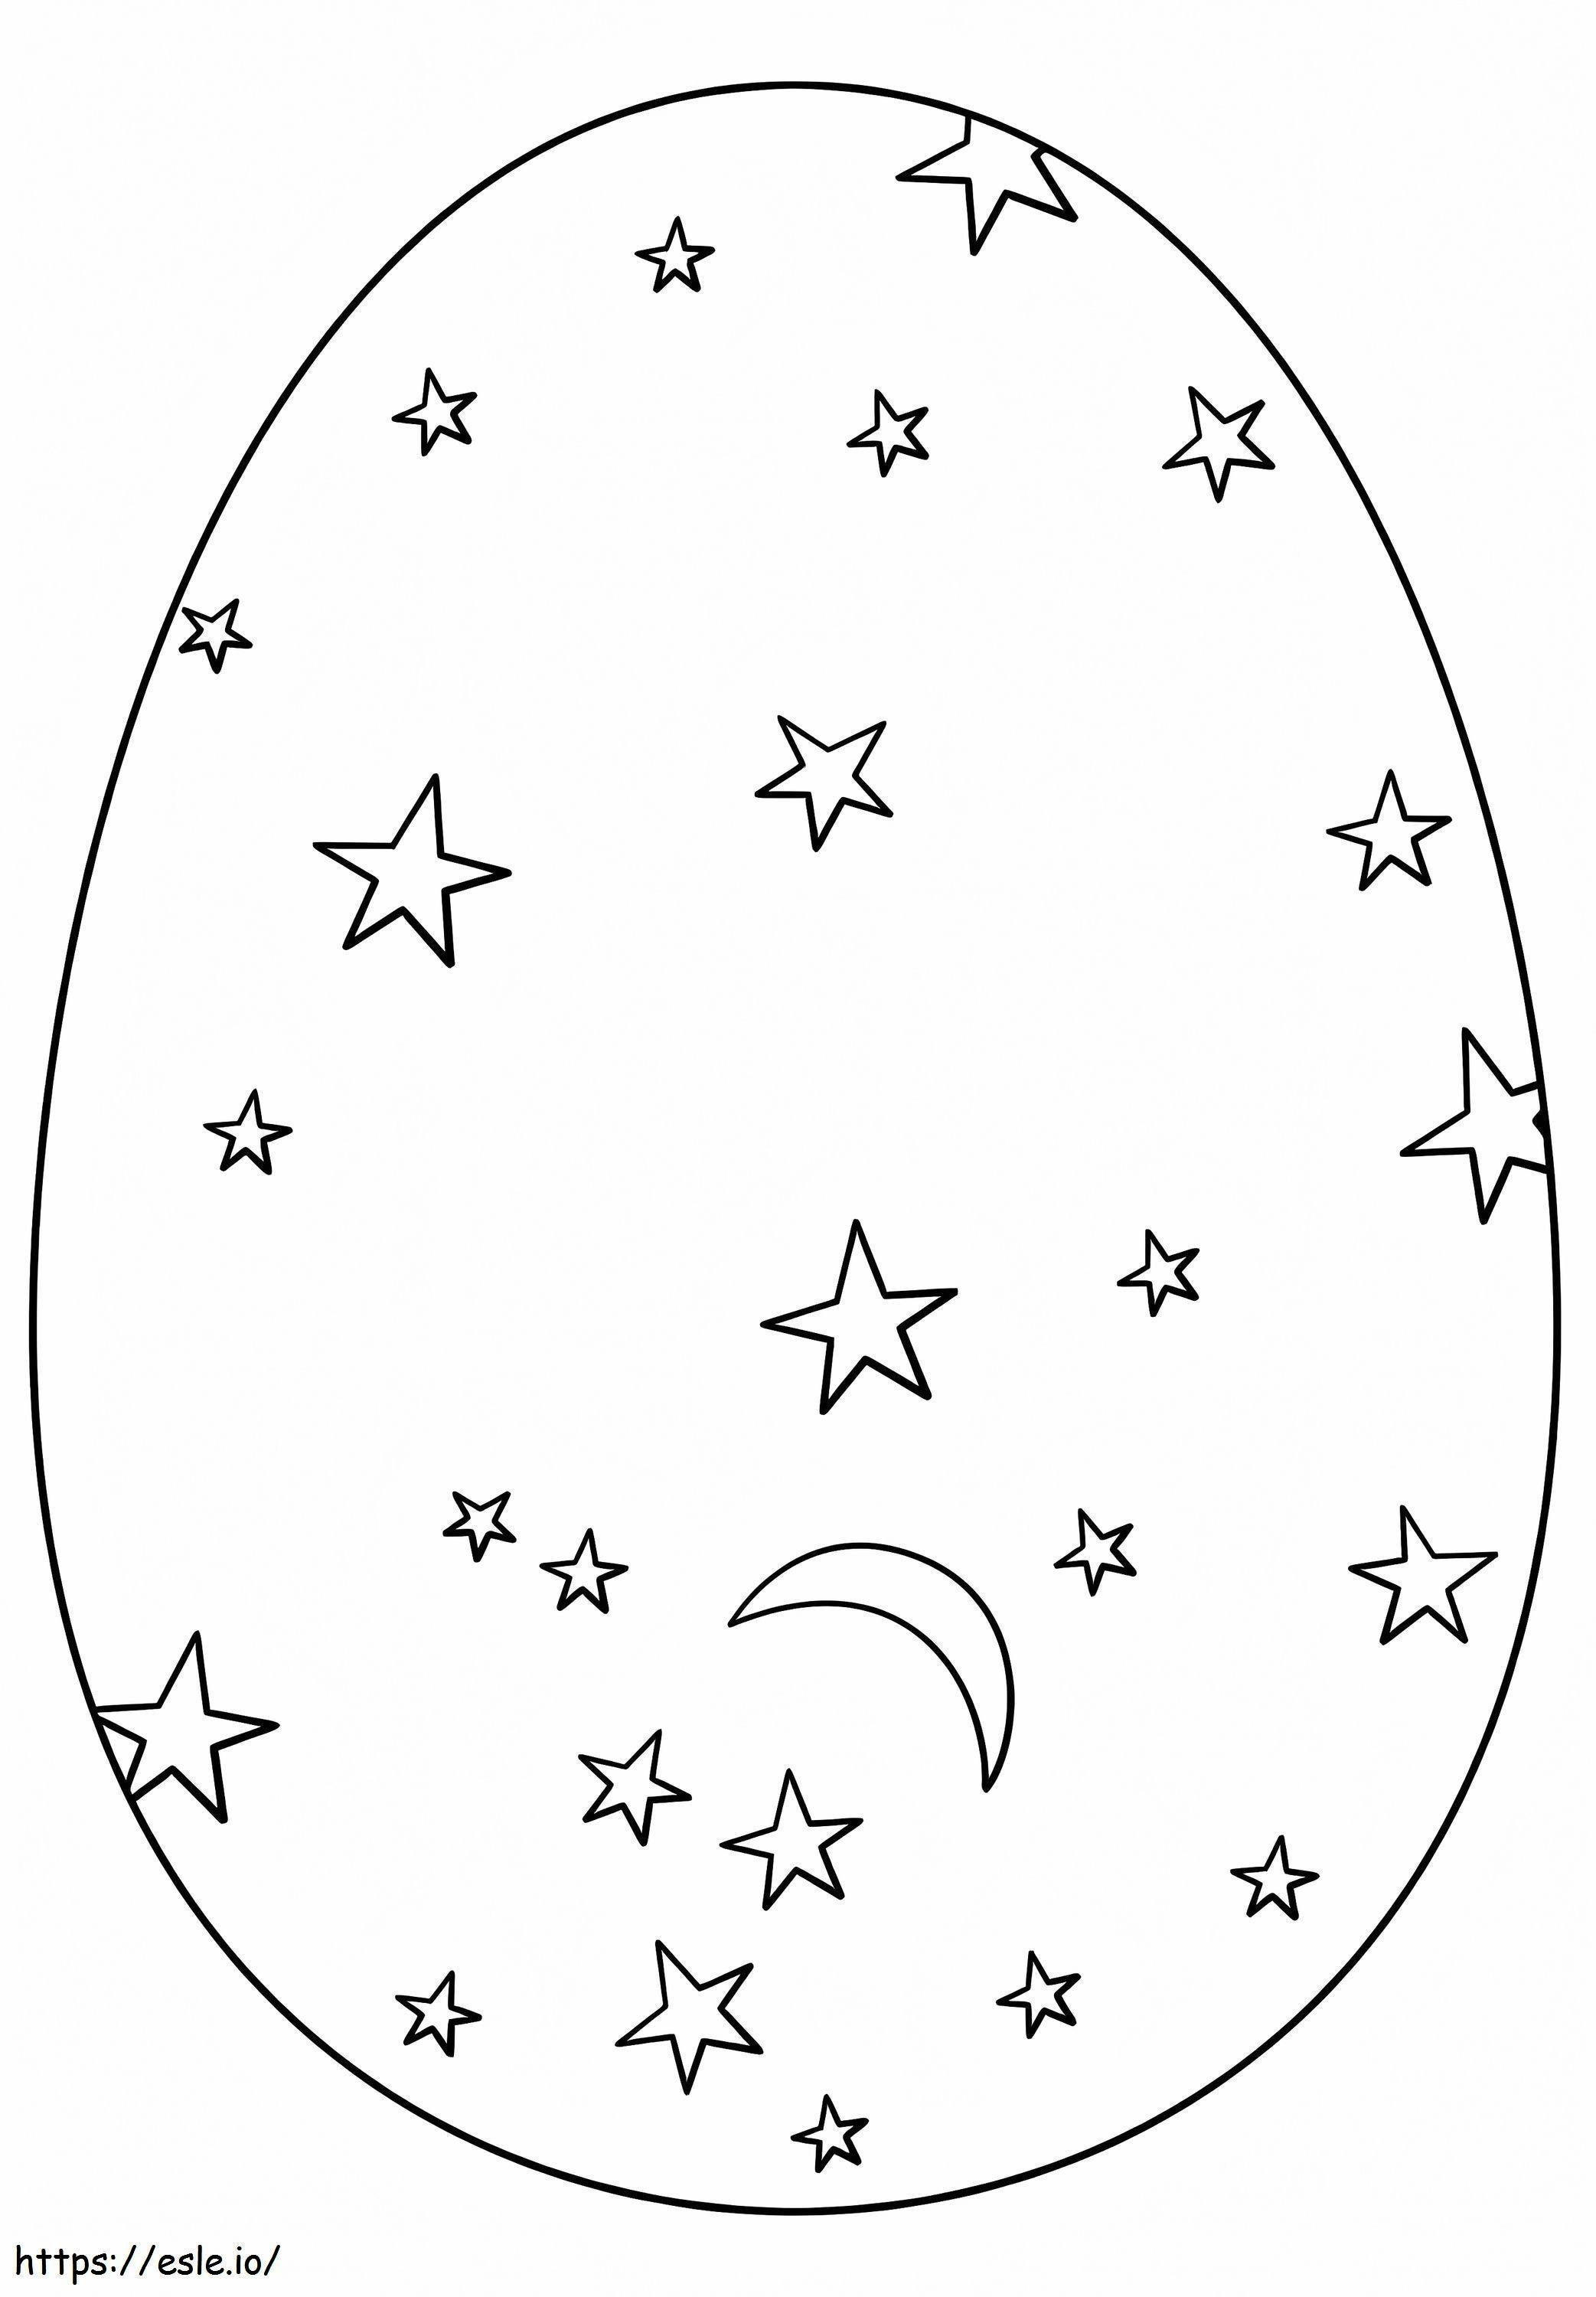 Wonderful Easter Egg 3 coloring page